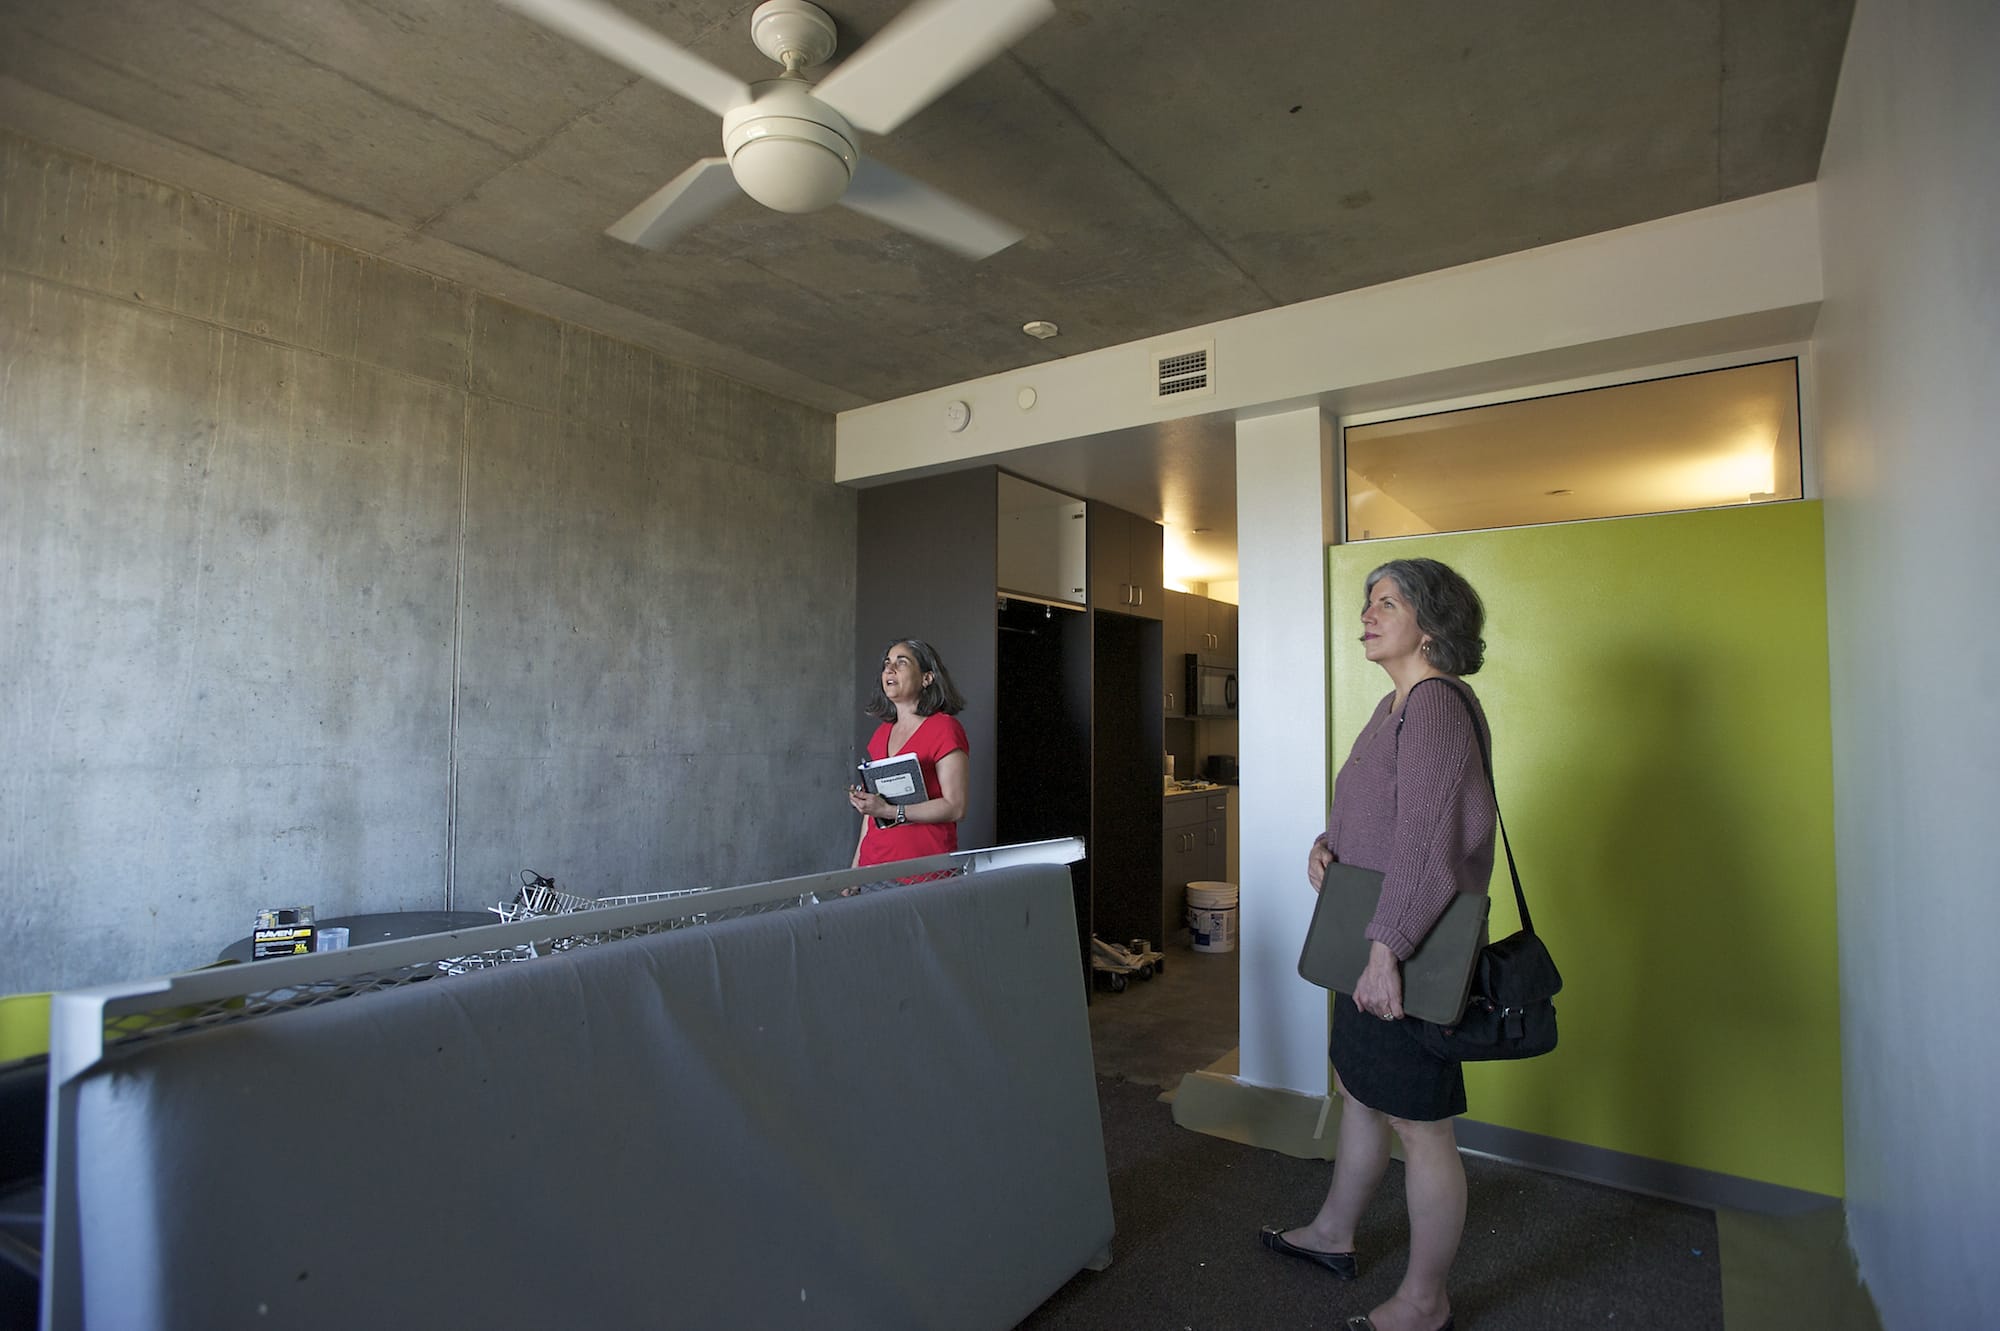 Bud Clark Commons property manager Rachel Duke, left, and public affairs director Shelley Marchesi give a tour of a vacant unit.